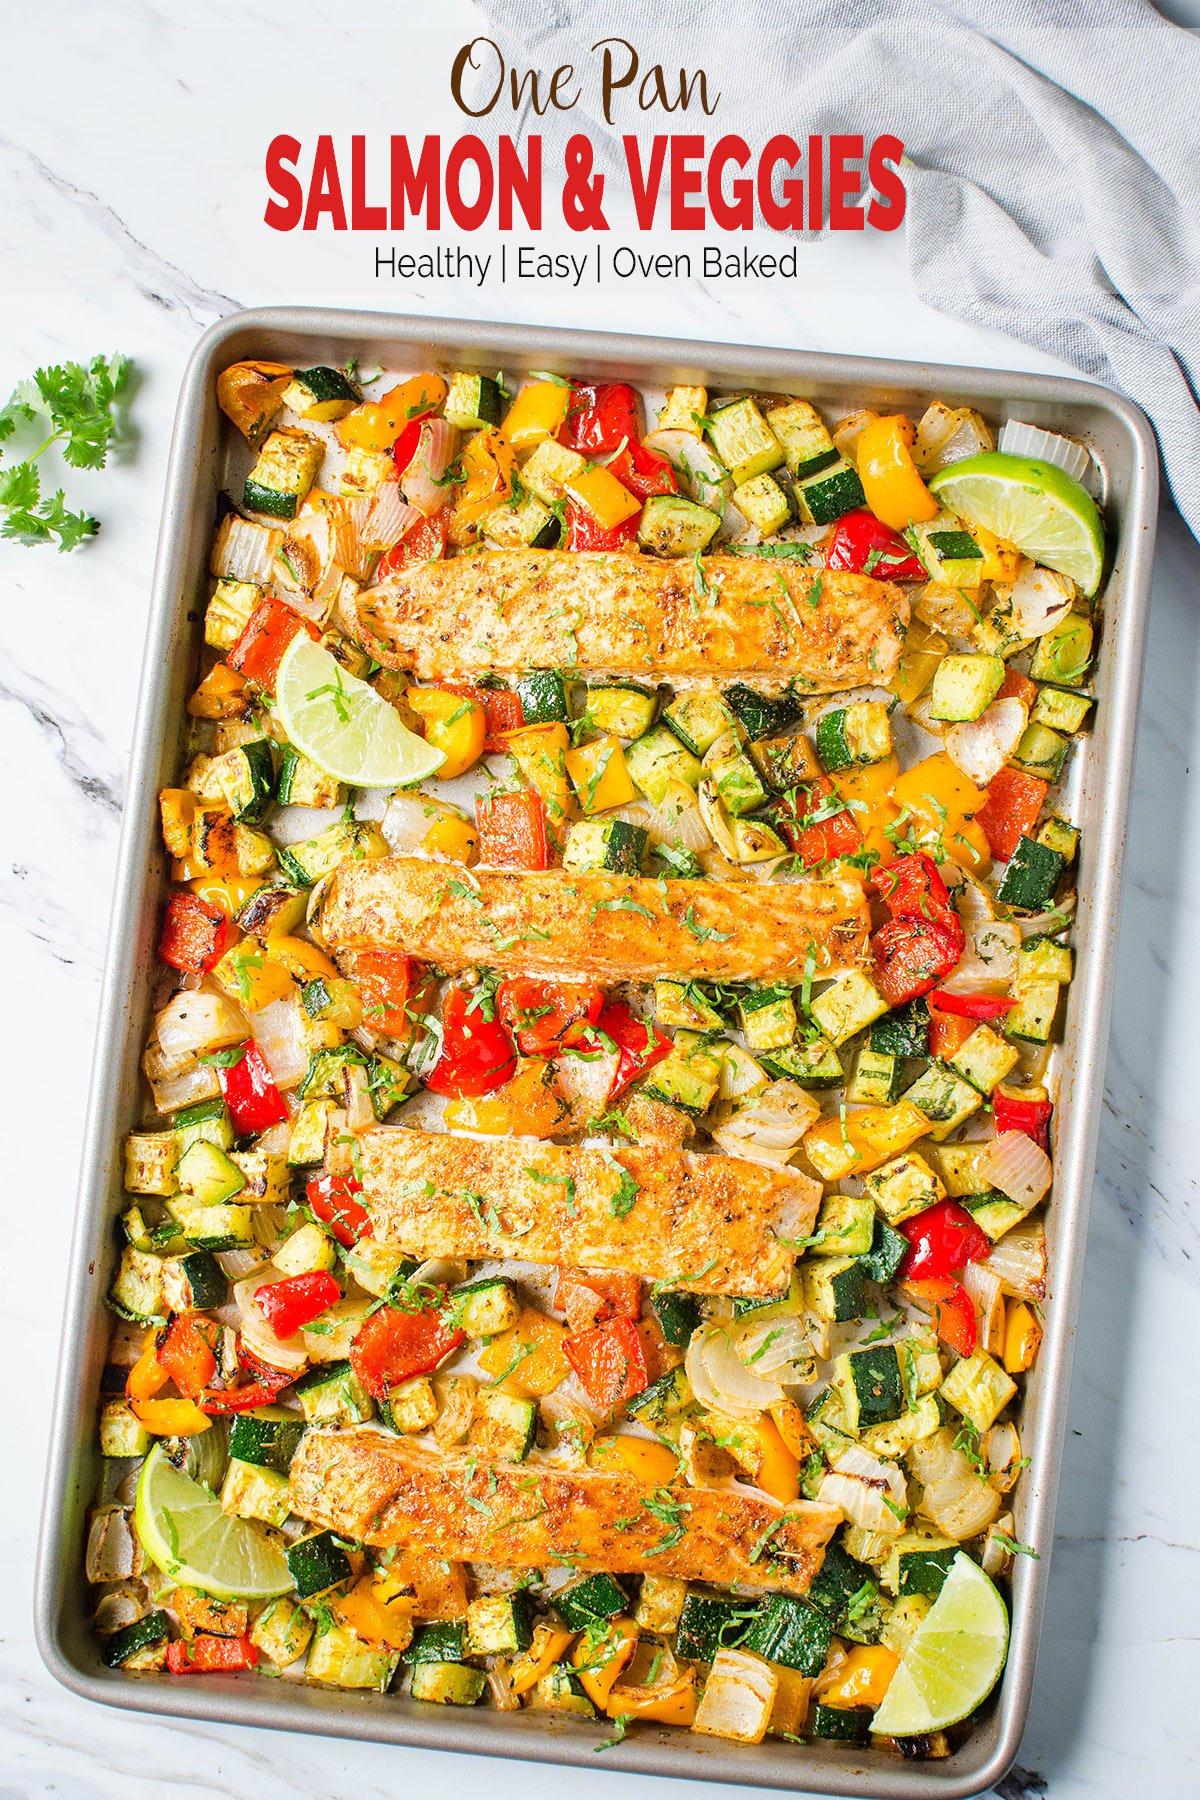 Salmon and vegetables baked together in one pan for an easy, healthy and quick dinner. Get the grilled look on veggies and salmon in the oven. And for a gluten-free meal serve with brown rice or quinoa. | #watchwhatueat #salmon #onepan #healthydinner #healthyrecipes